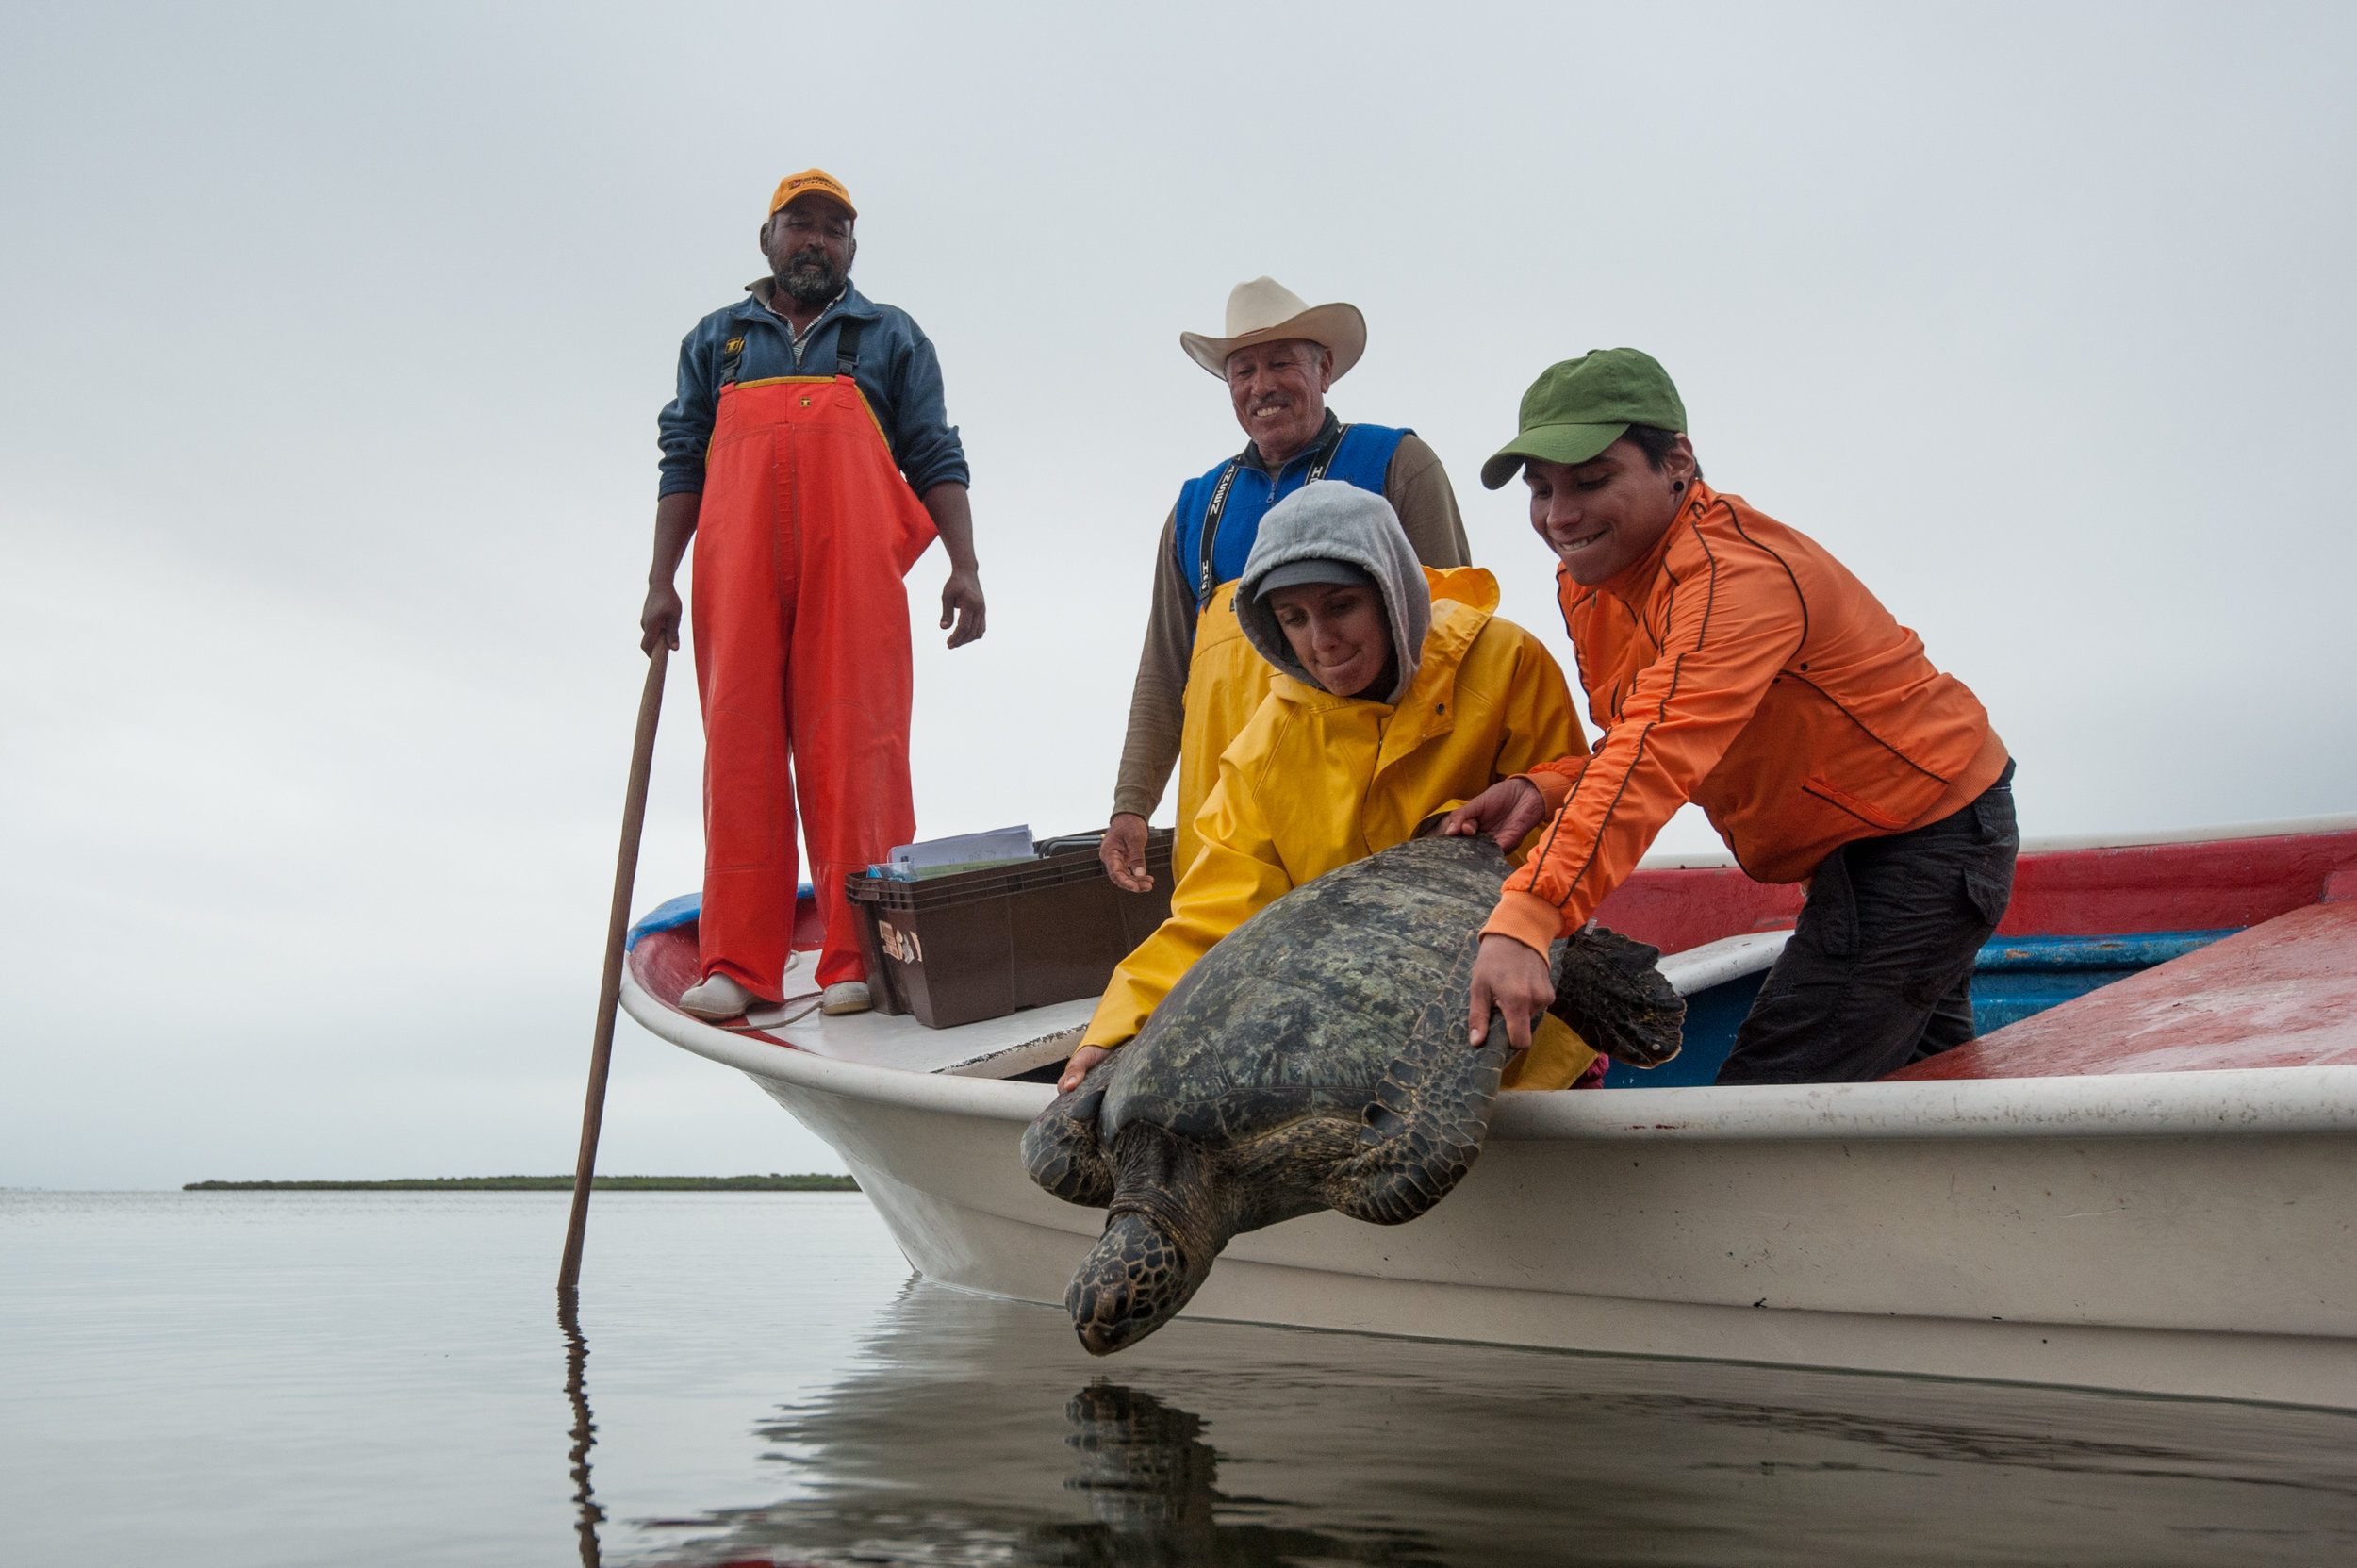 Once the data is collected, we will release the turtles back to the water